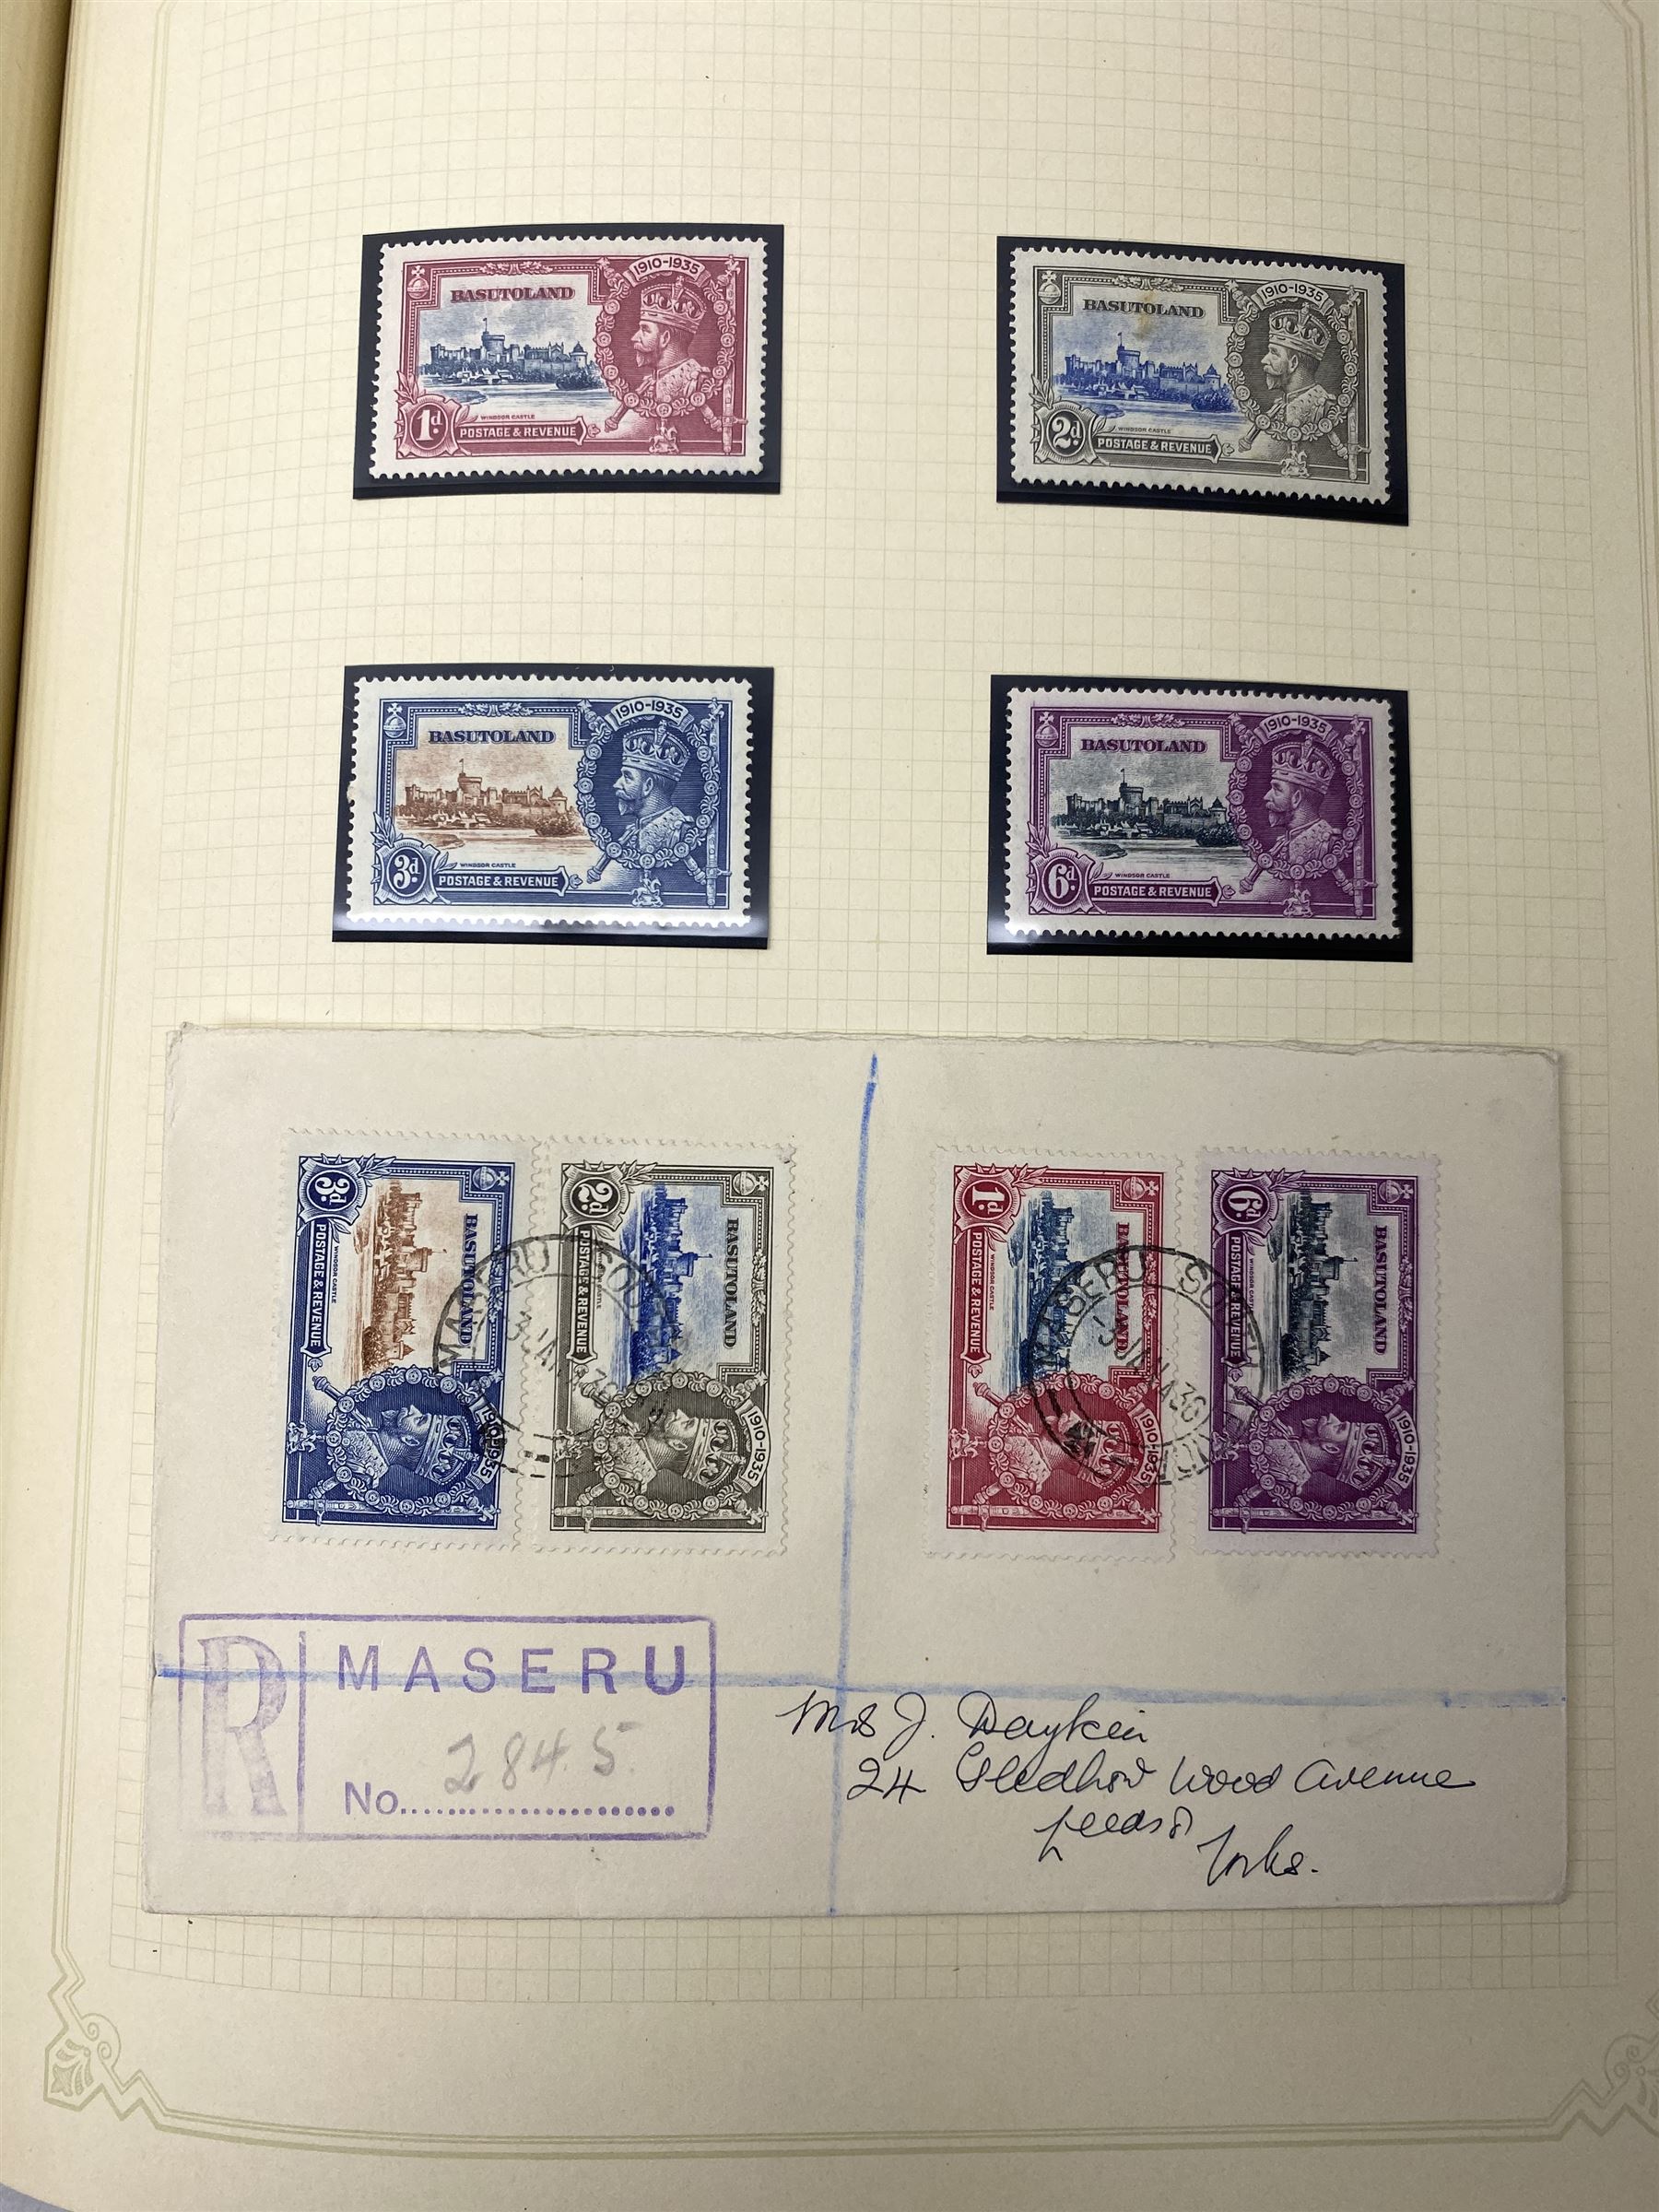 King George V 1935 Silver Jubilee stamps - Image 9 of 17